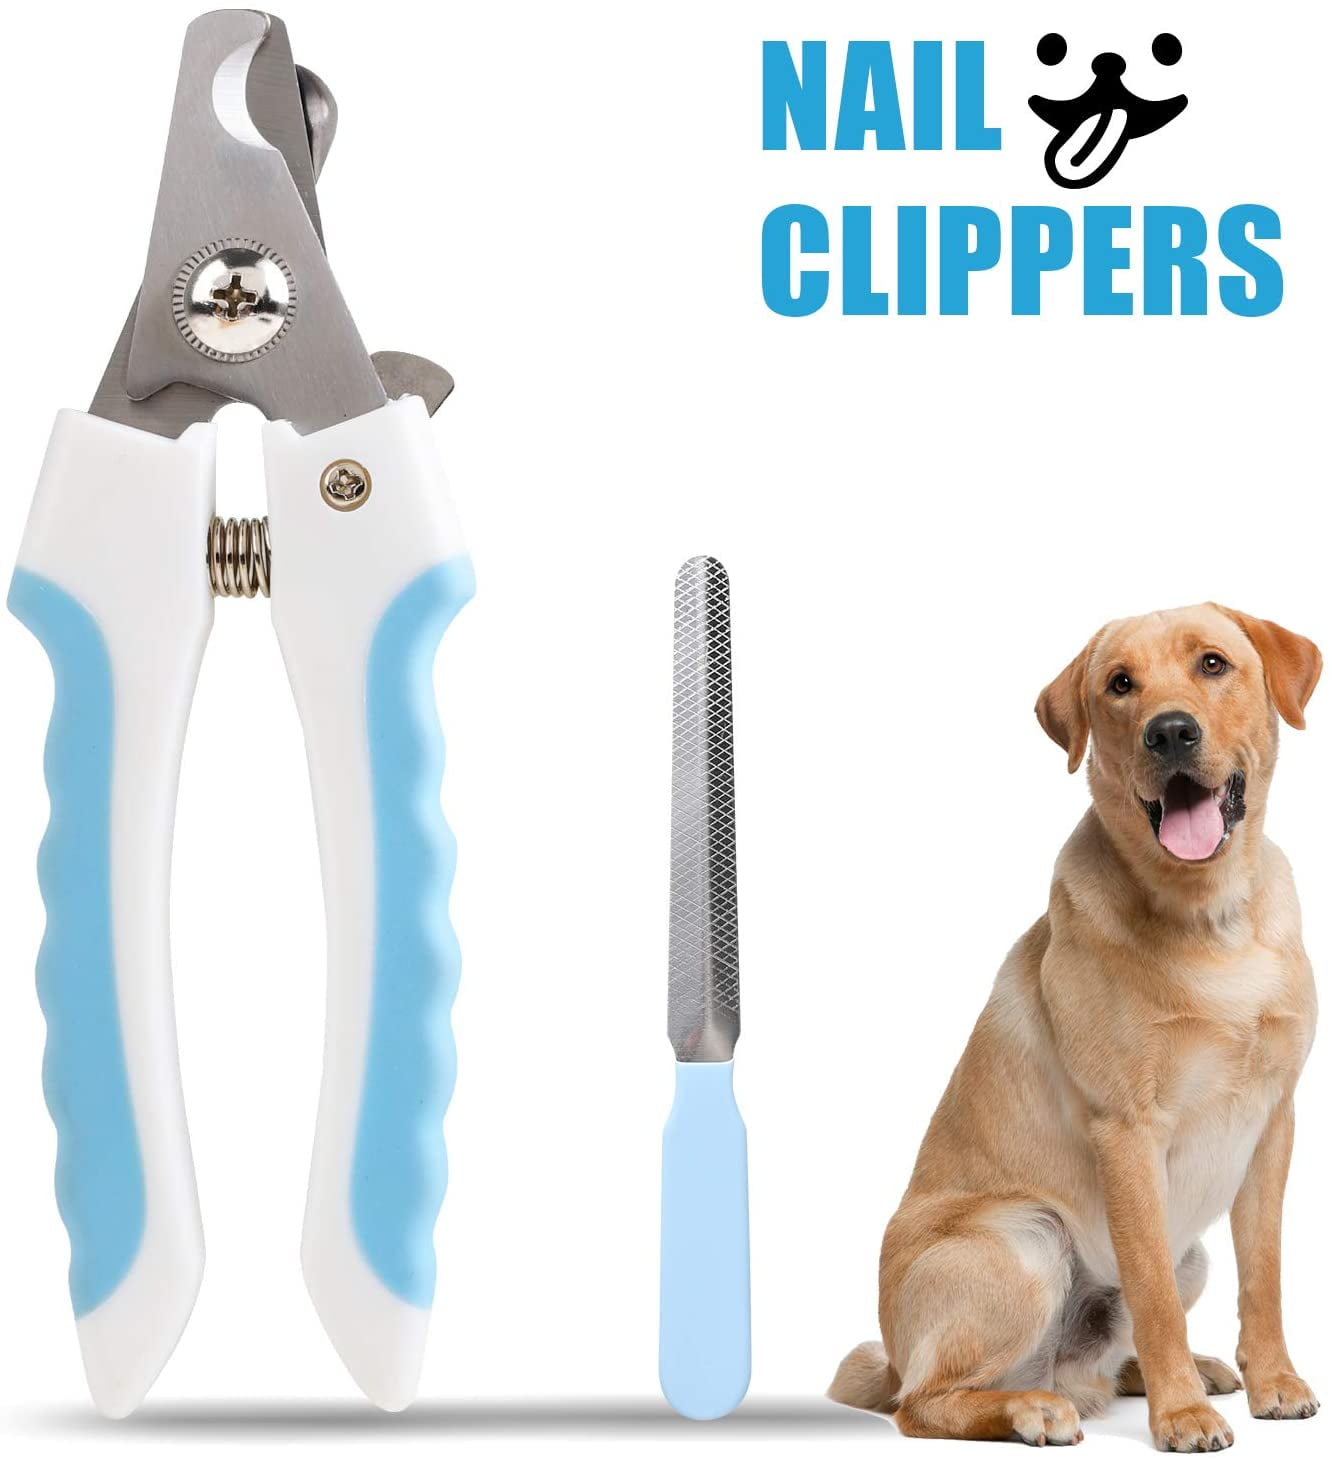  H&H Pets Cats and Dogs Nail Clippers Series - Razor Sharp  Blades Sturdy Non Slip Handles - Cats & Dog Accessories Professional at Home  Grooming - Stainless Steel